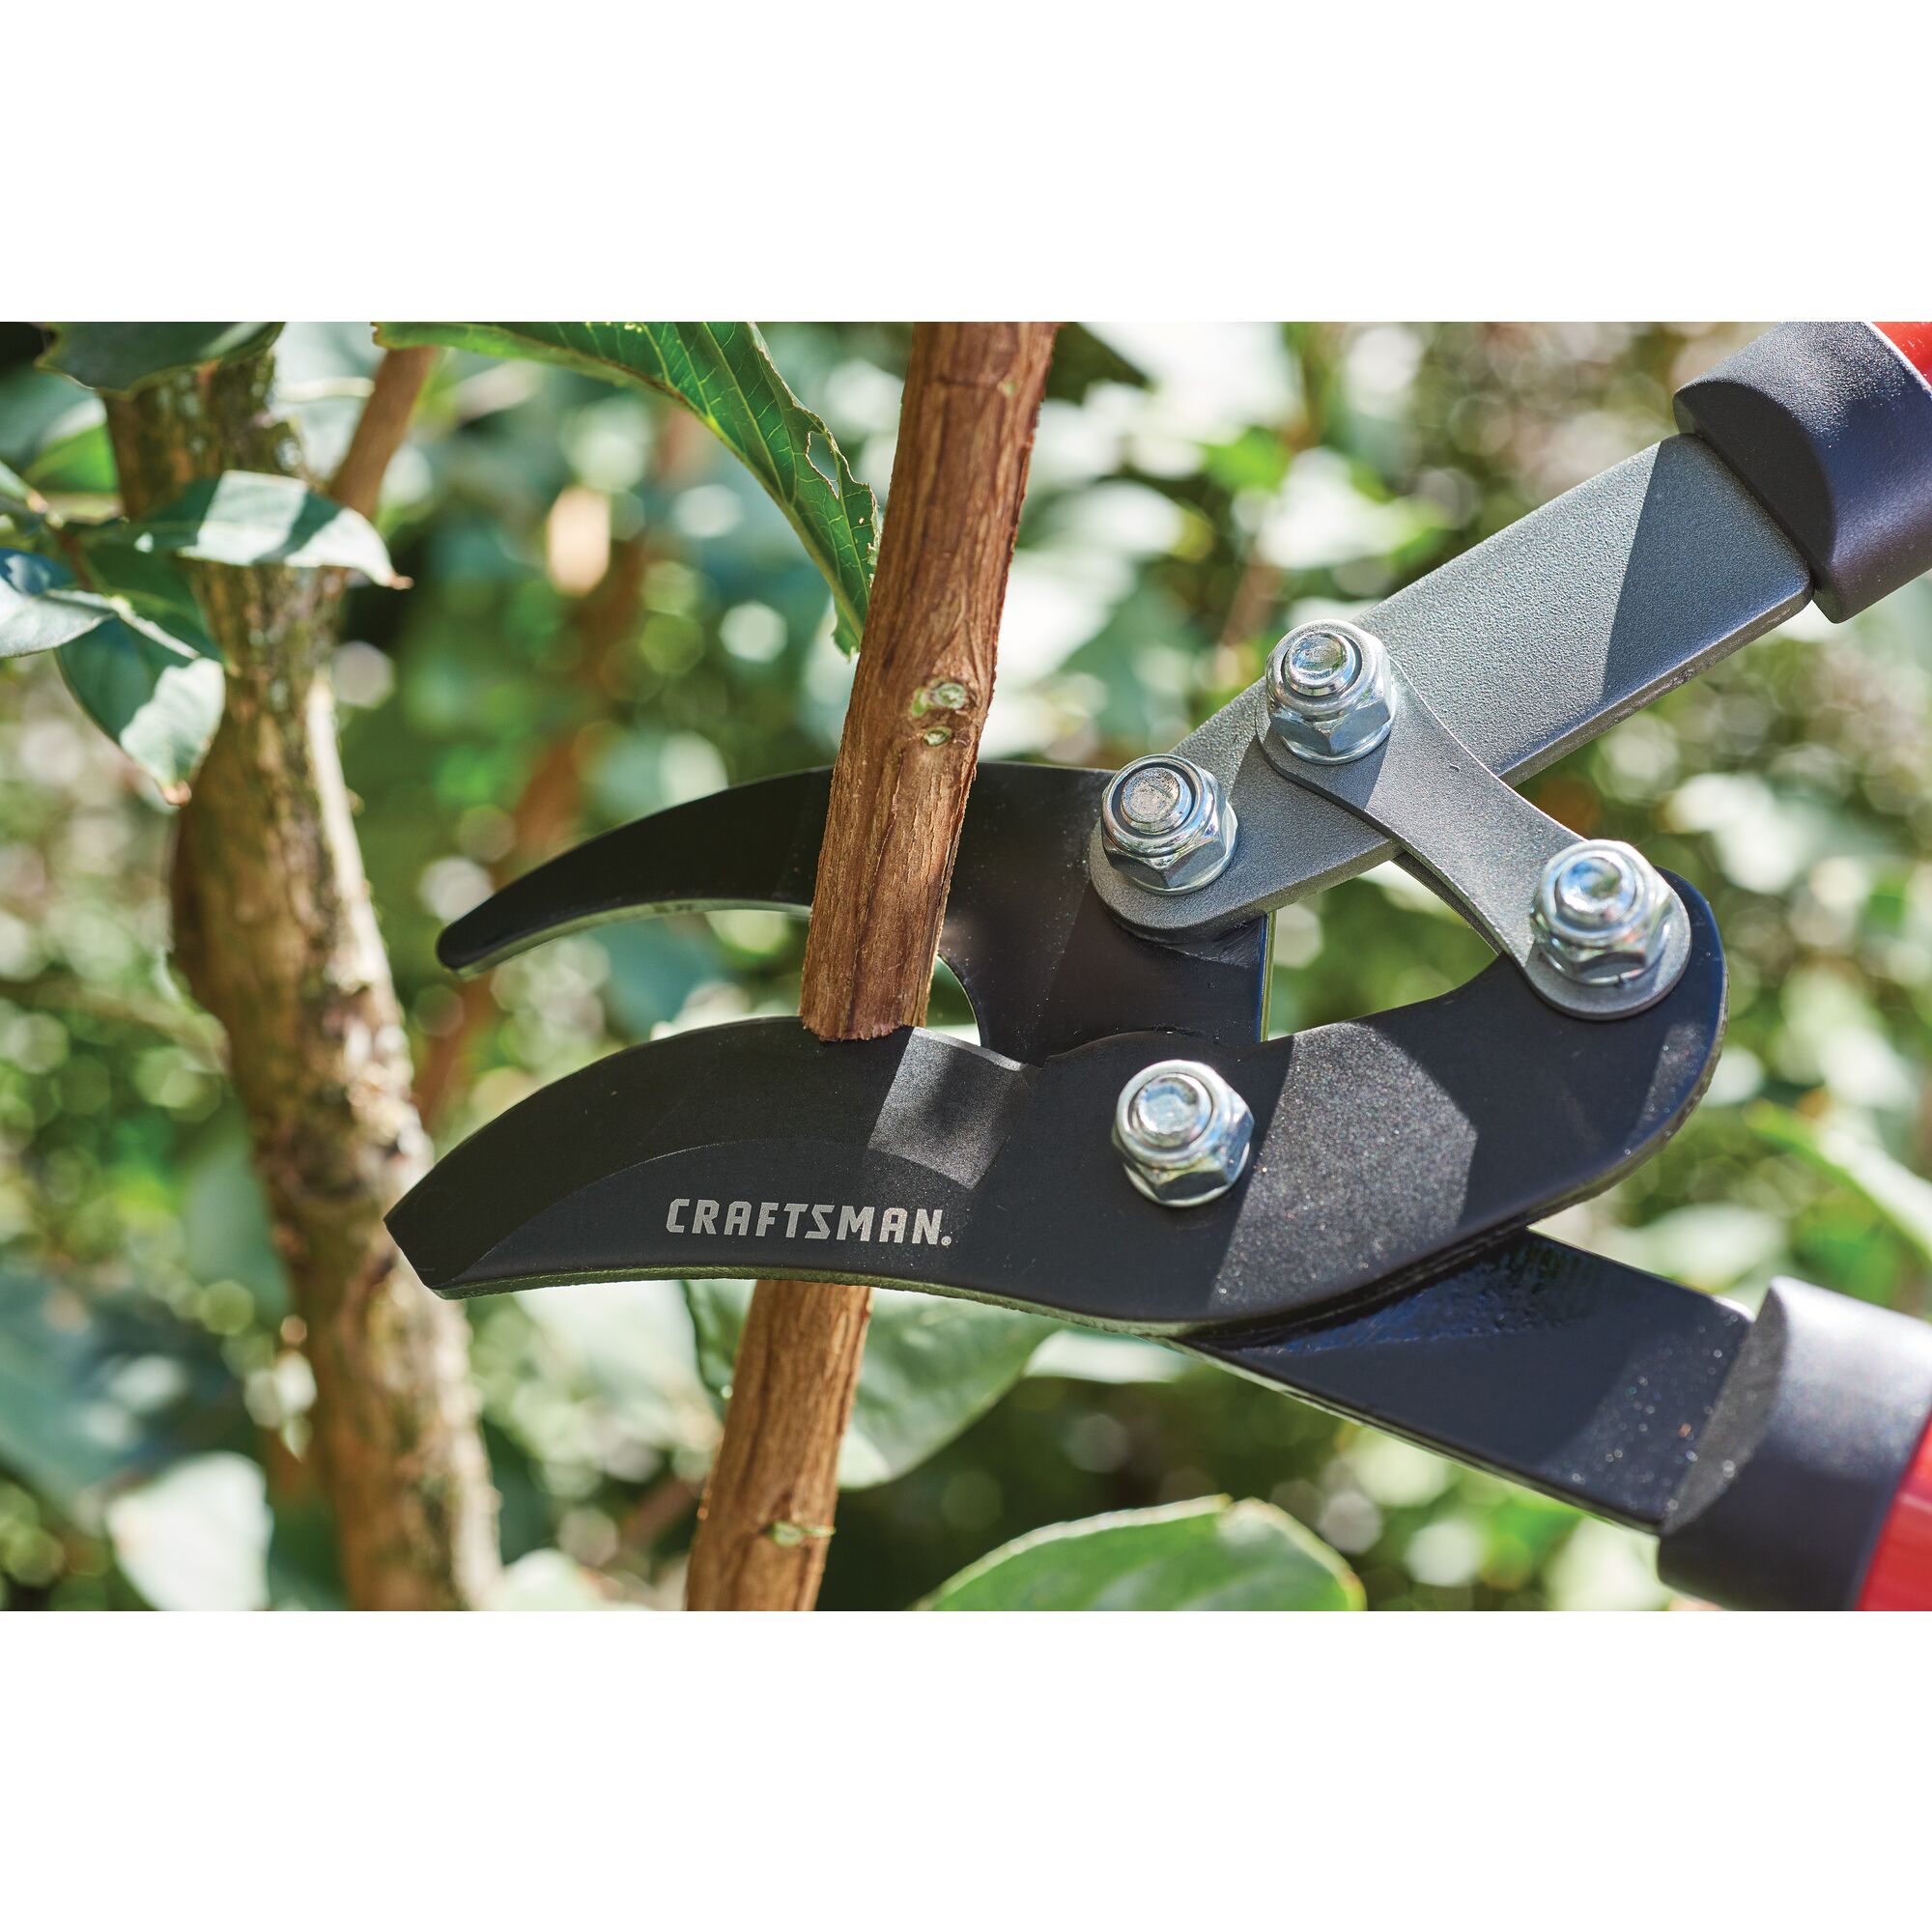 Close up of compound bypass lopper being used by a person to cut a branch outdoors.